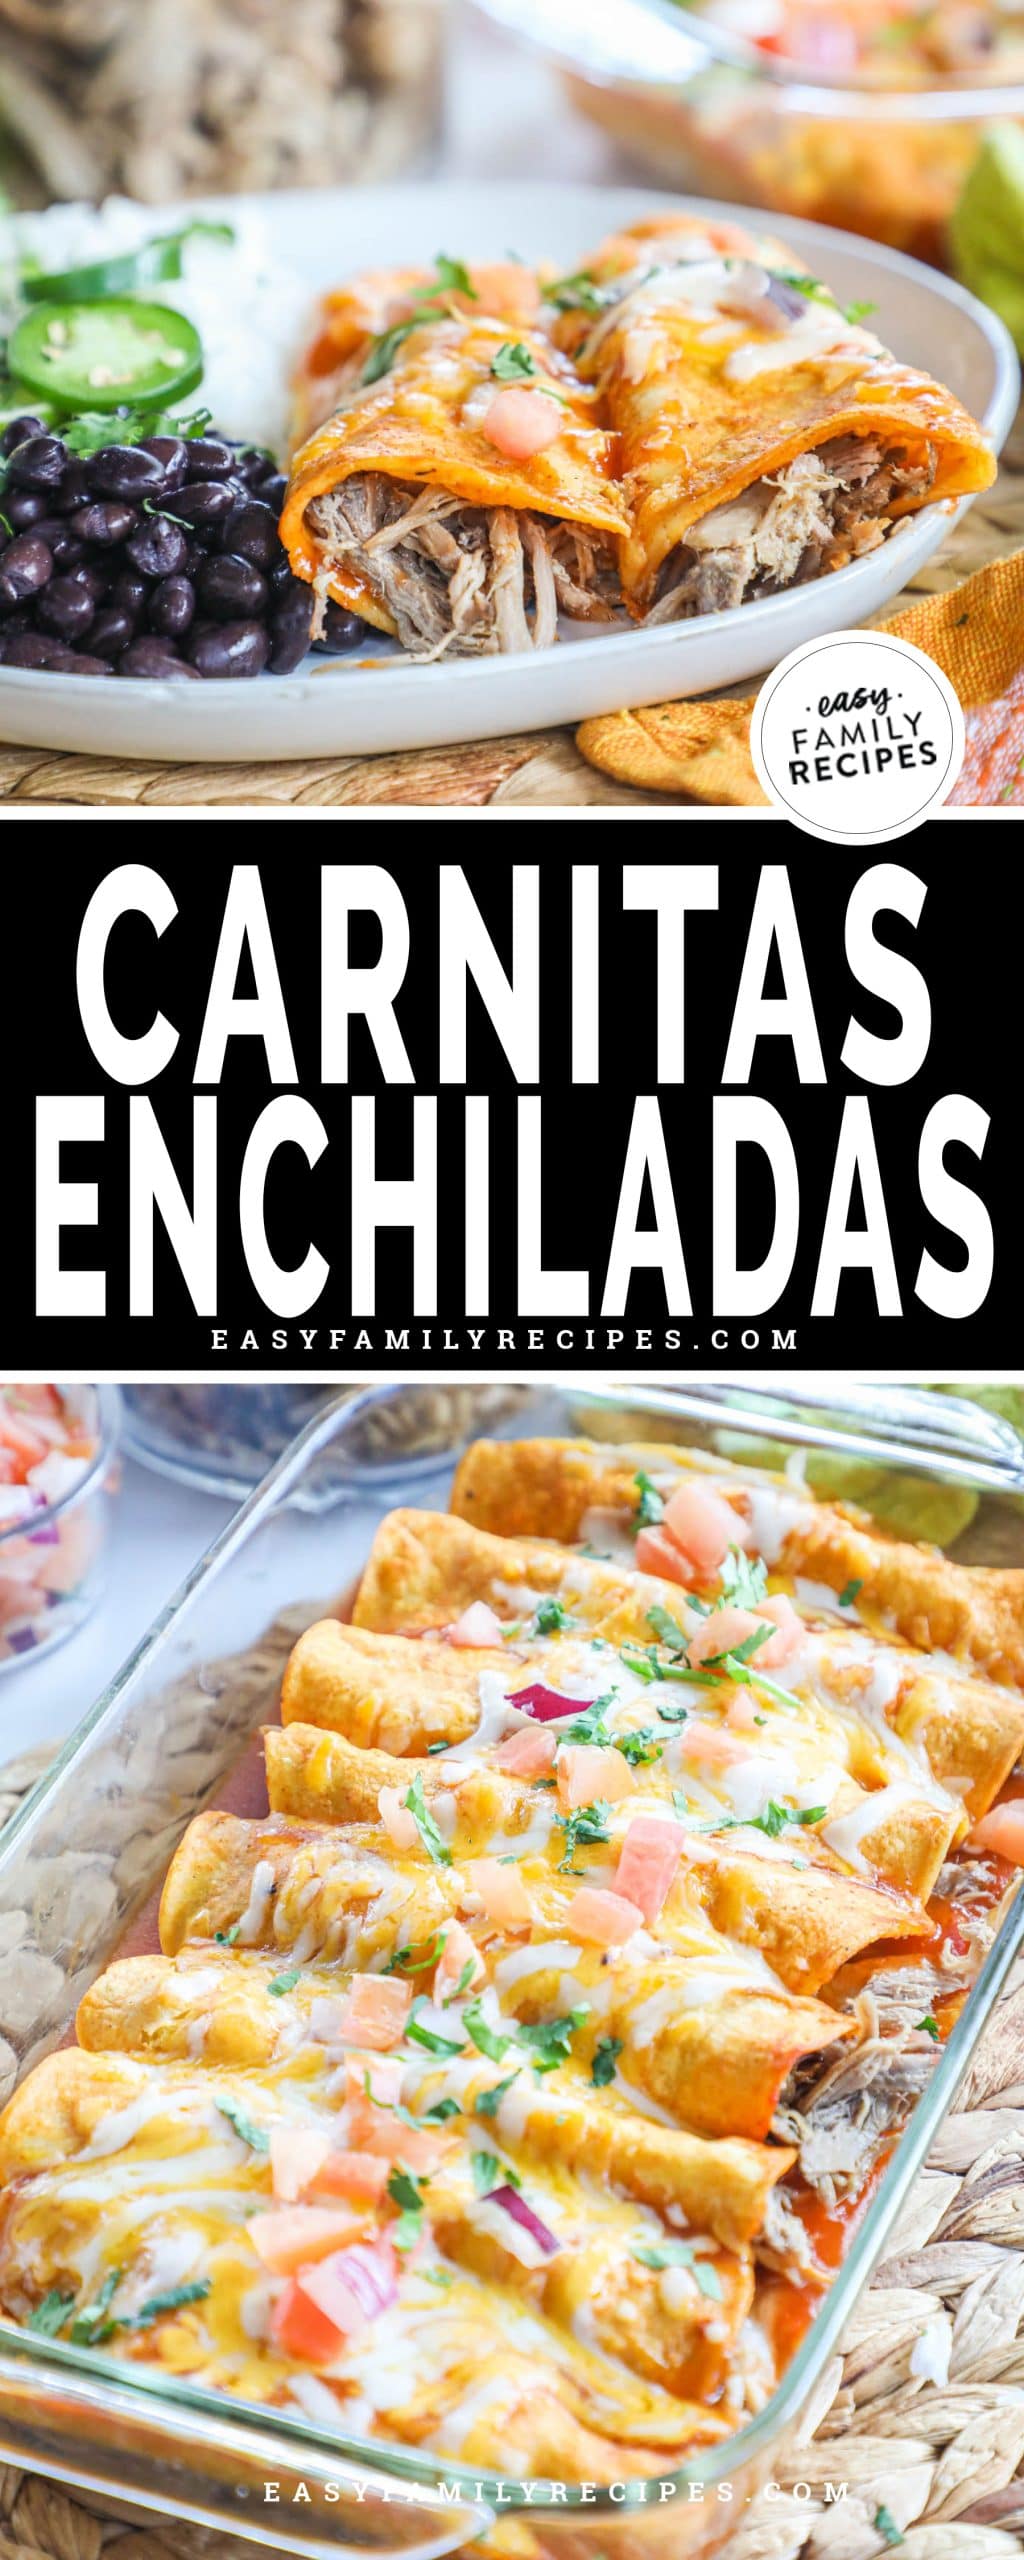 plate with serving of carnitas enchiladas and baking dish with baked enchiladas.